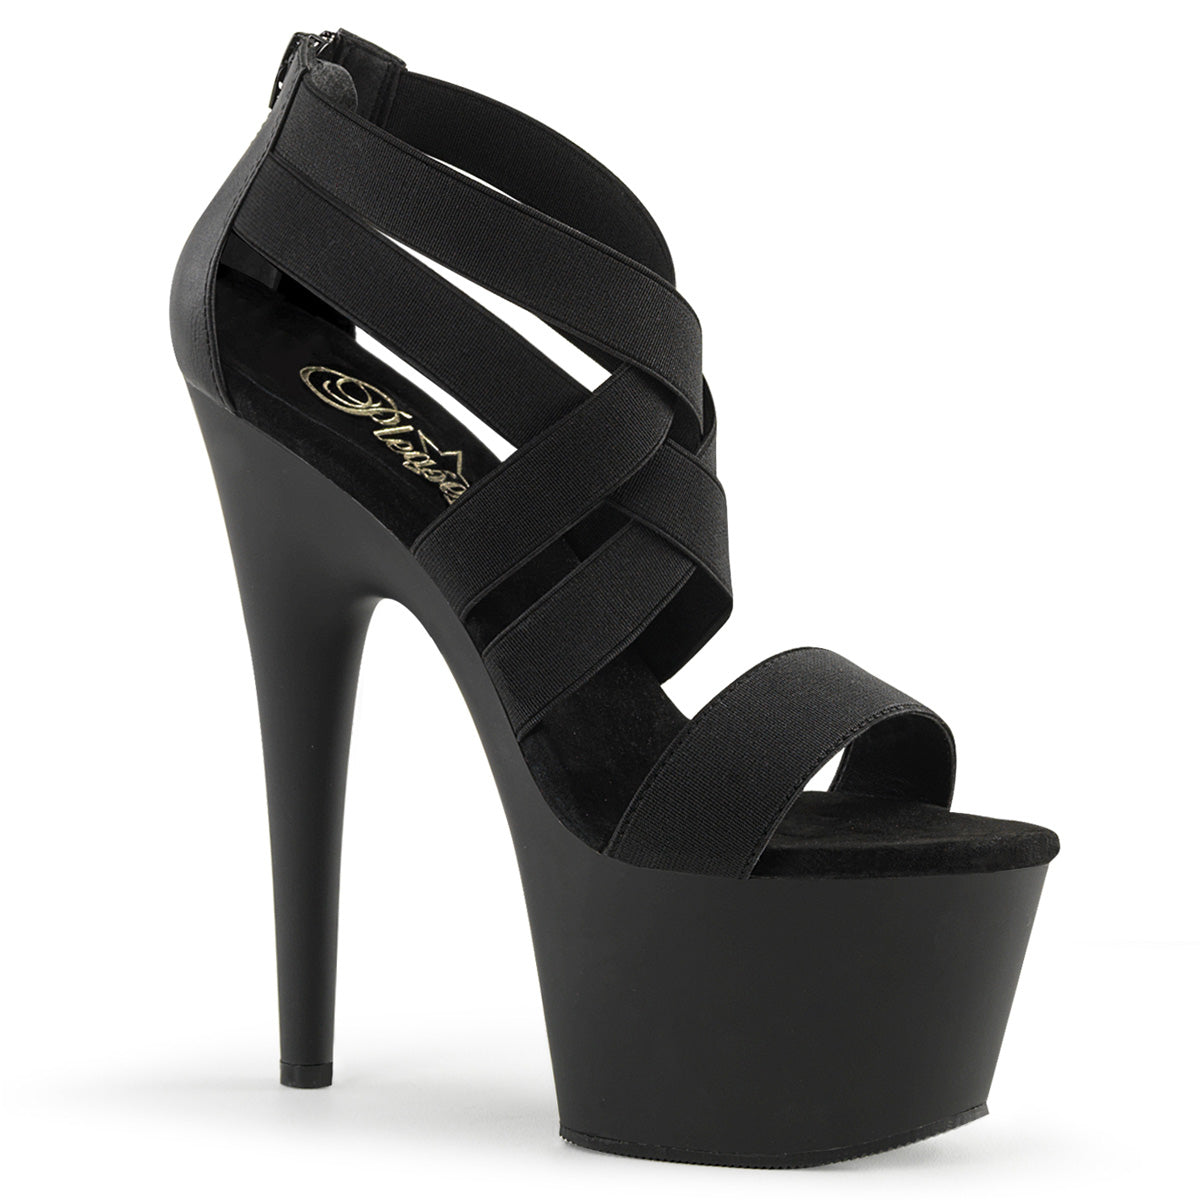 ADORE-769 Pleaser Sexy 7 Inch Heel Black Strappy Strippers Sandals